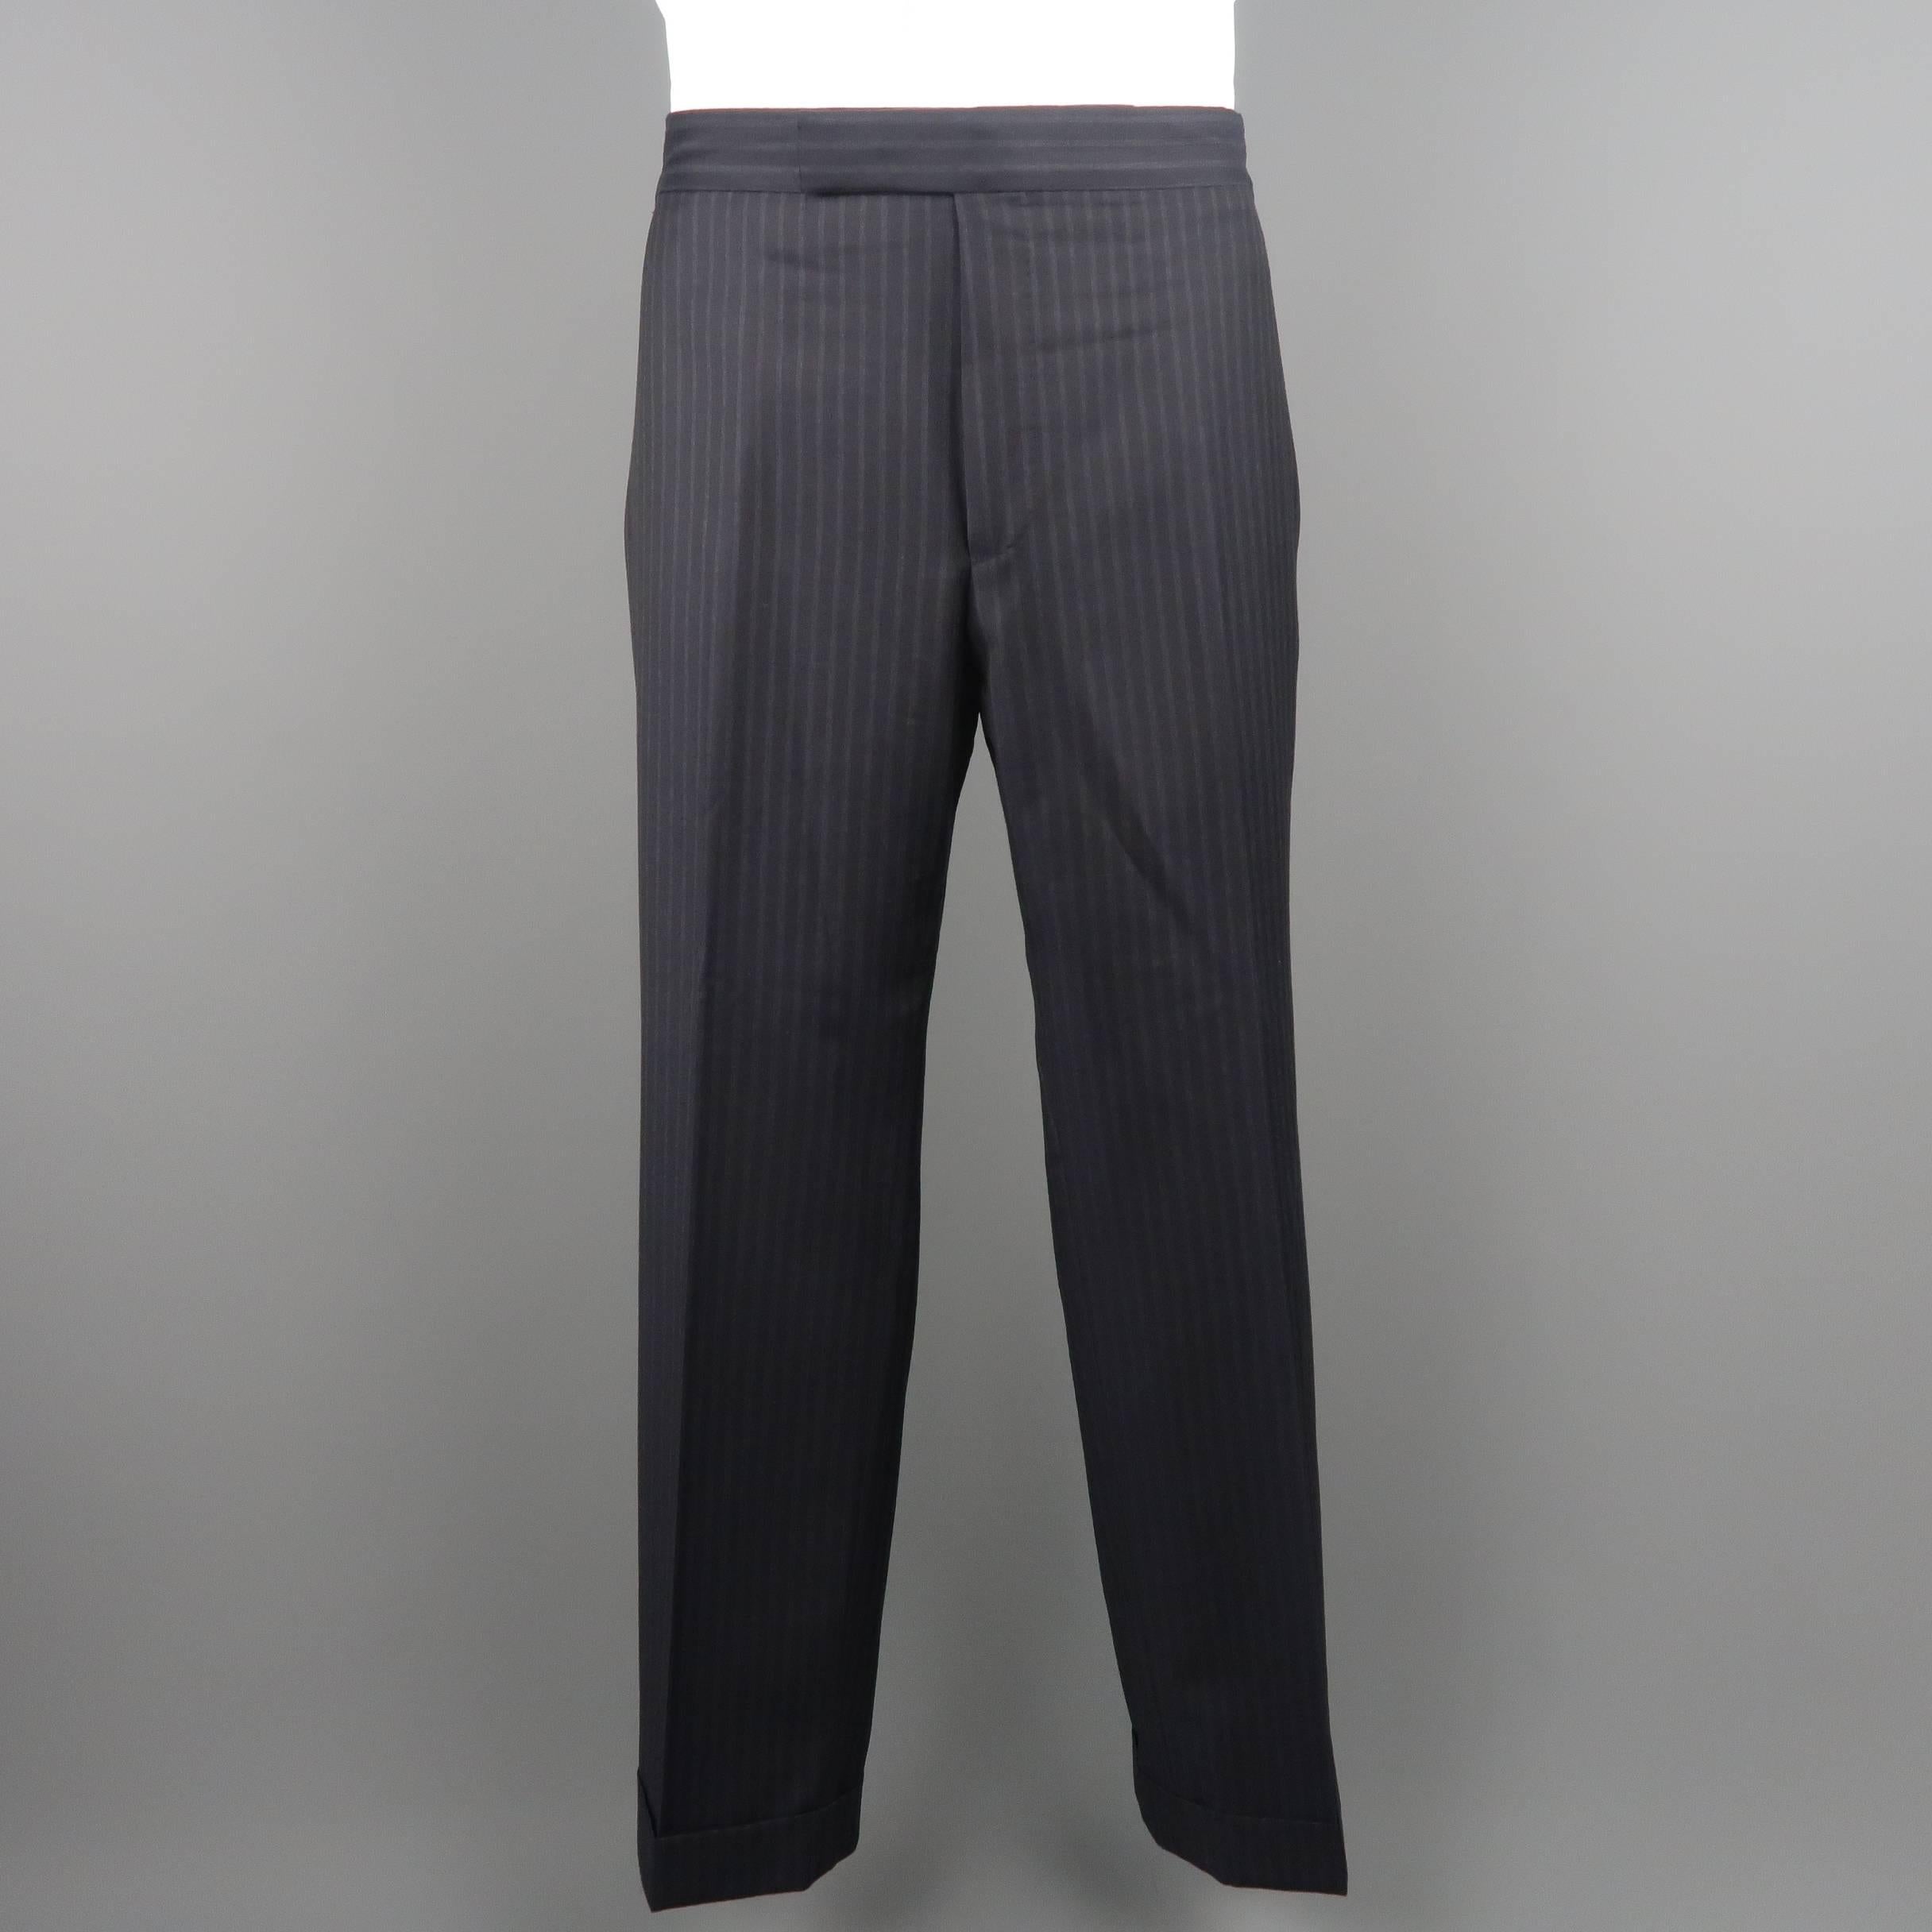 Two piece Tom Ford suit comes in black pinstriped wool twill and includes a single breasted, two button sport coat with notch lapel, triple flap pockets, and functional button cuffs with matching flat front, cuffed dress pants.  Made in Italy.
